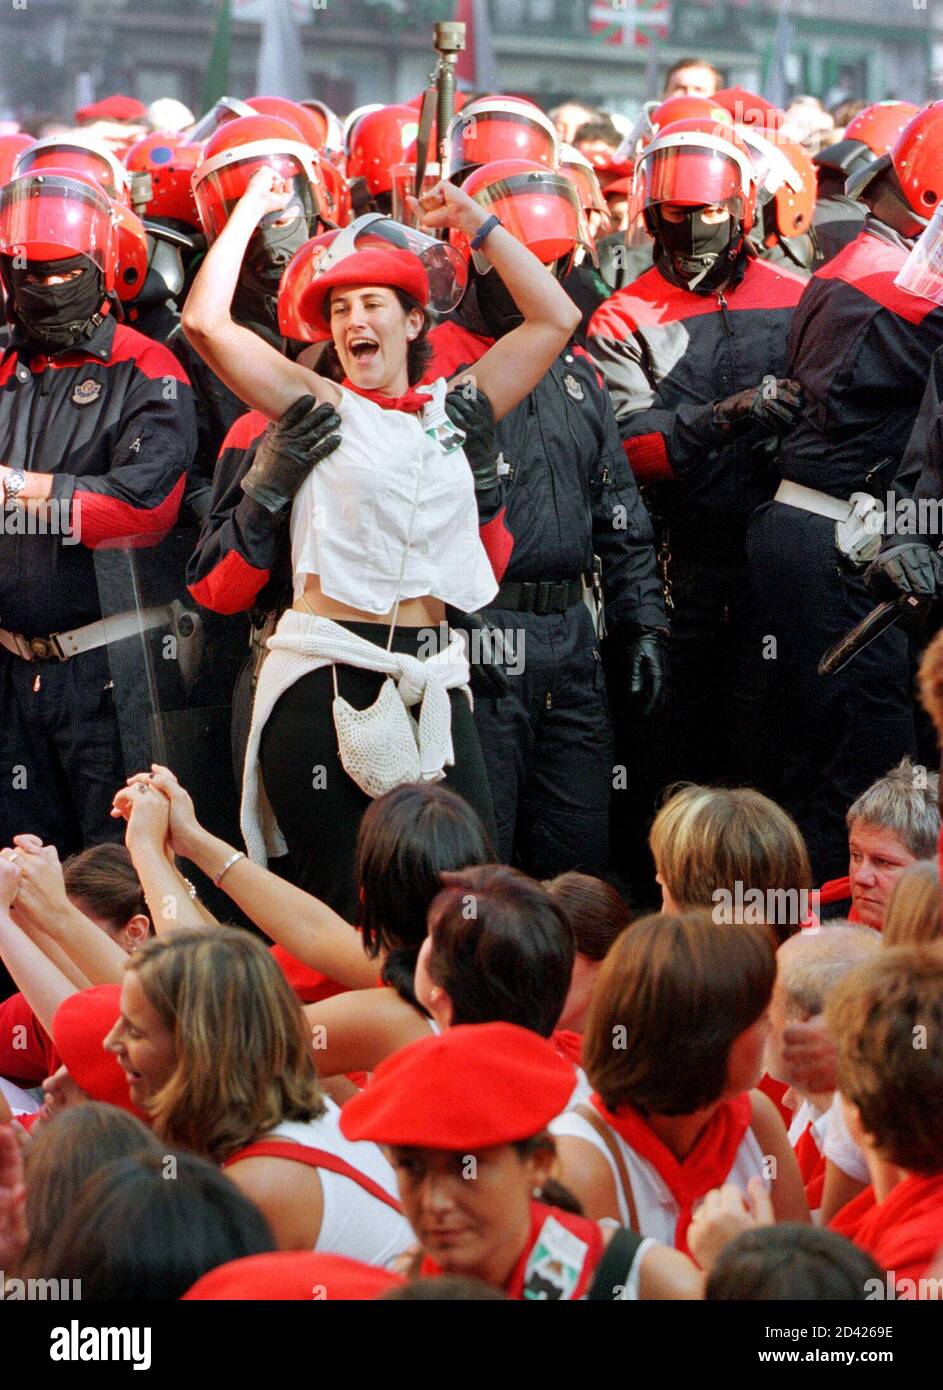 Basque policemen detain a group of women blocking a road during a march of traditionalists in the town of Hondarribia September 8, 2000. Police detained over 20 women. Traditionalist groups succeeded in preventing the participation of women in the all-male 'Alarde', a yearly parade celebrating an ancient war against French soldiers. Stock Photo